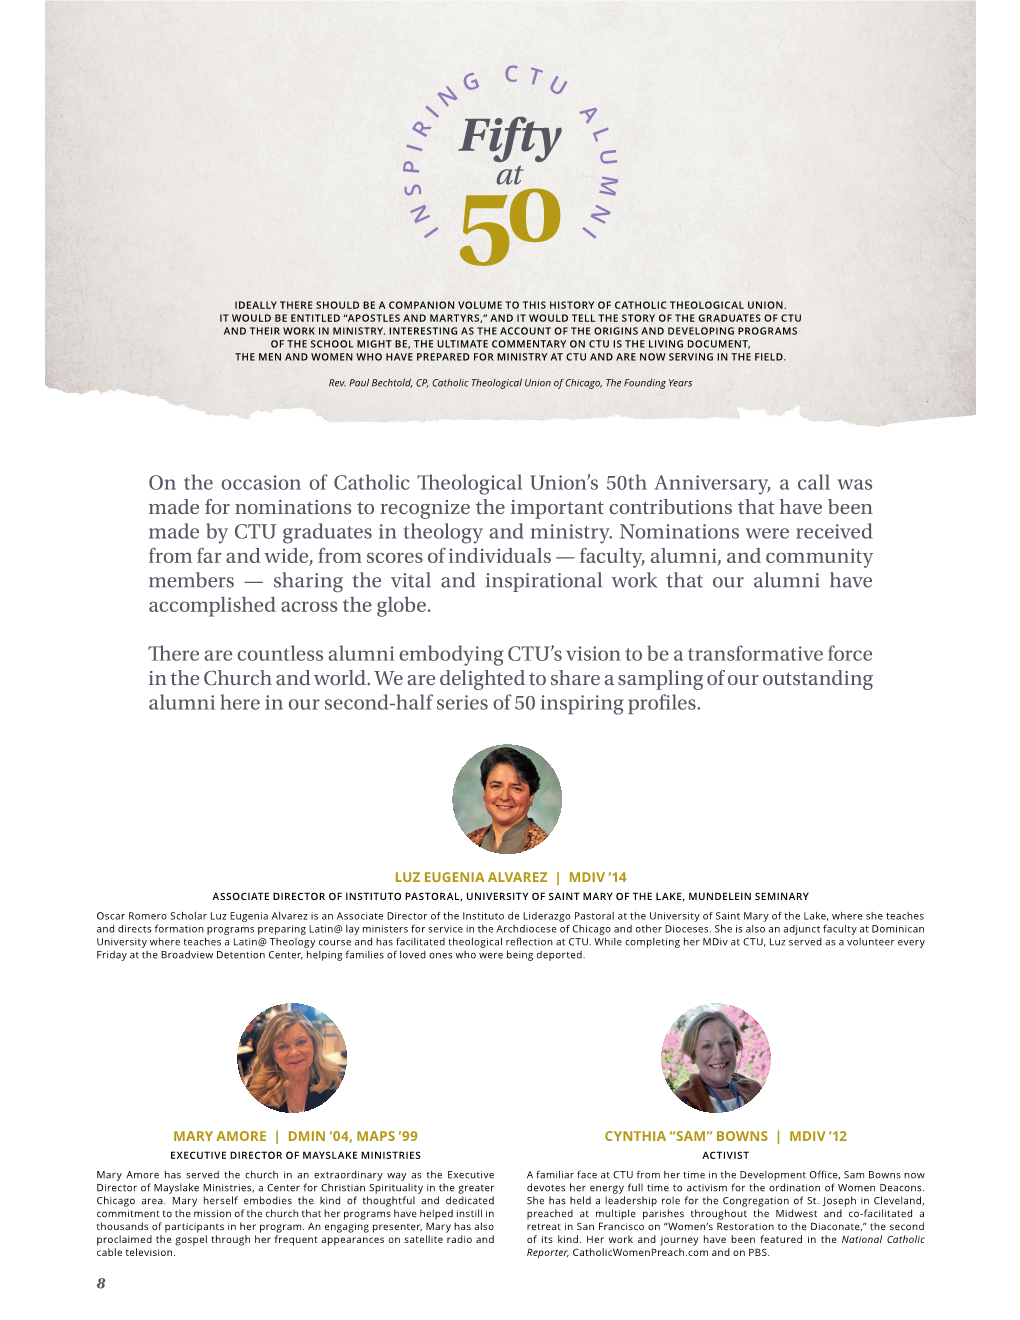 On the Occasion of Catholic Theological Union's 50Th